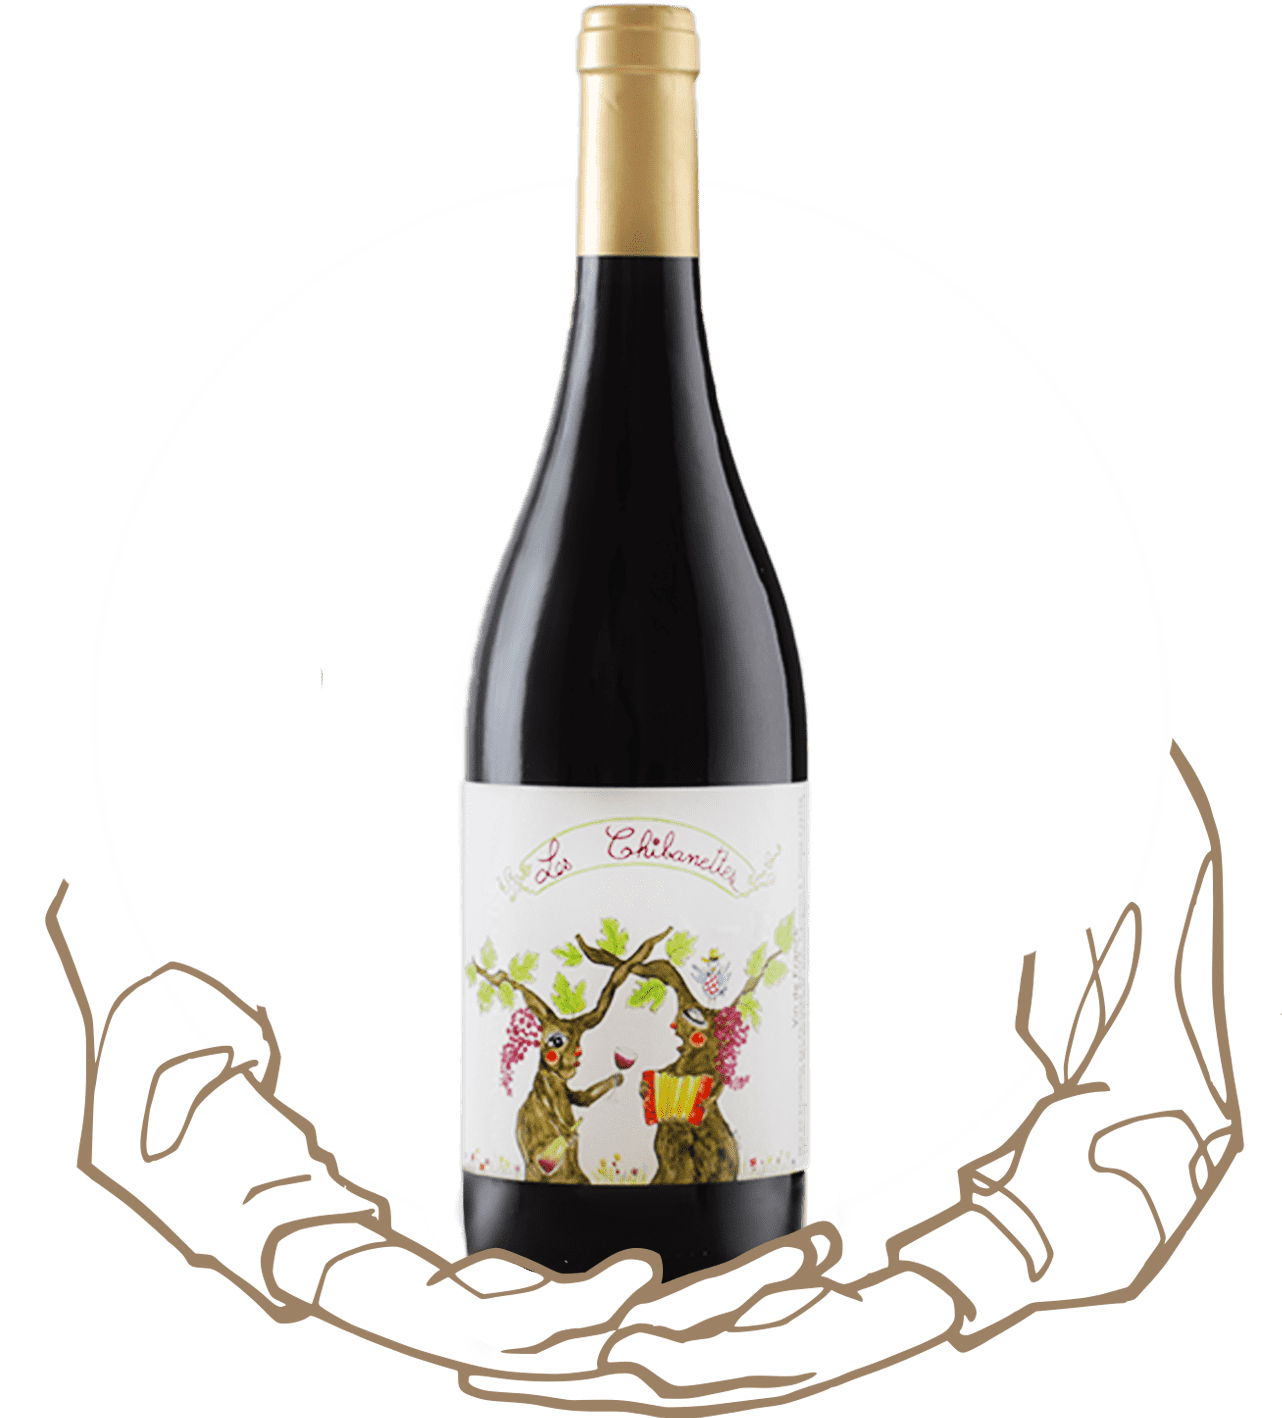 Les Chibanettes by Badea is an organic and natural wine from south of france